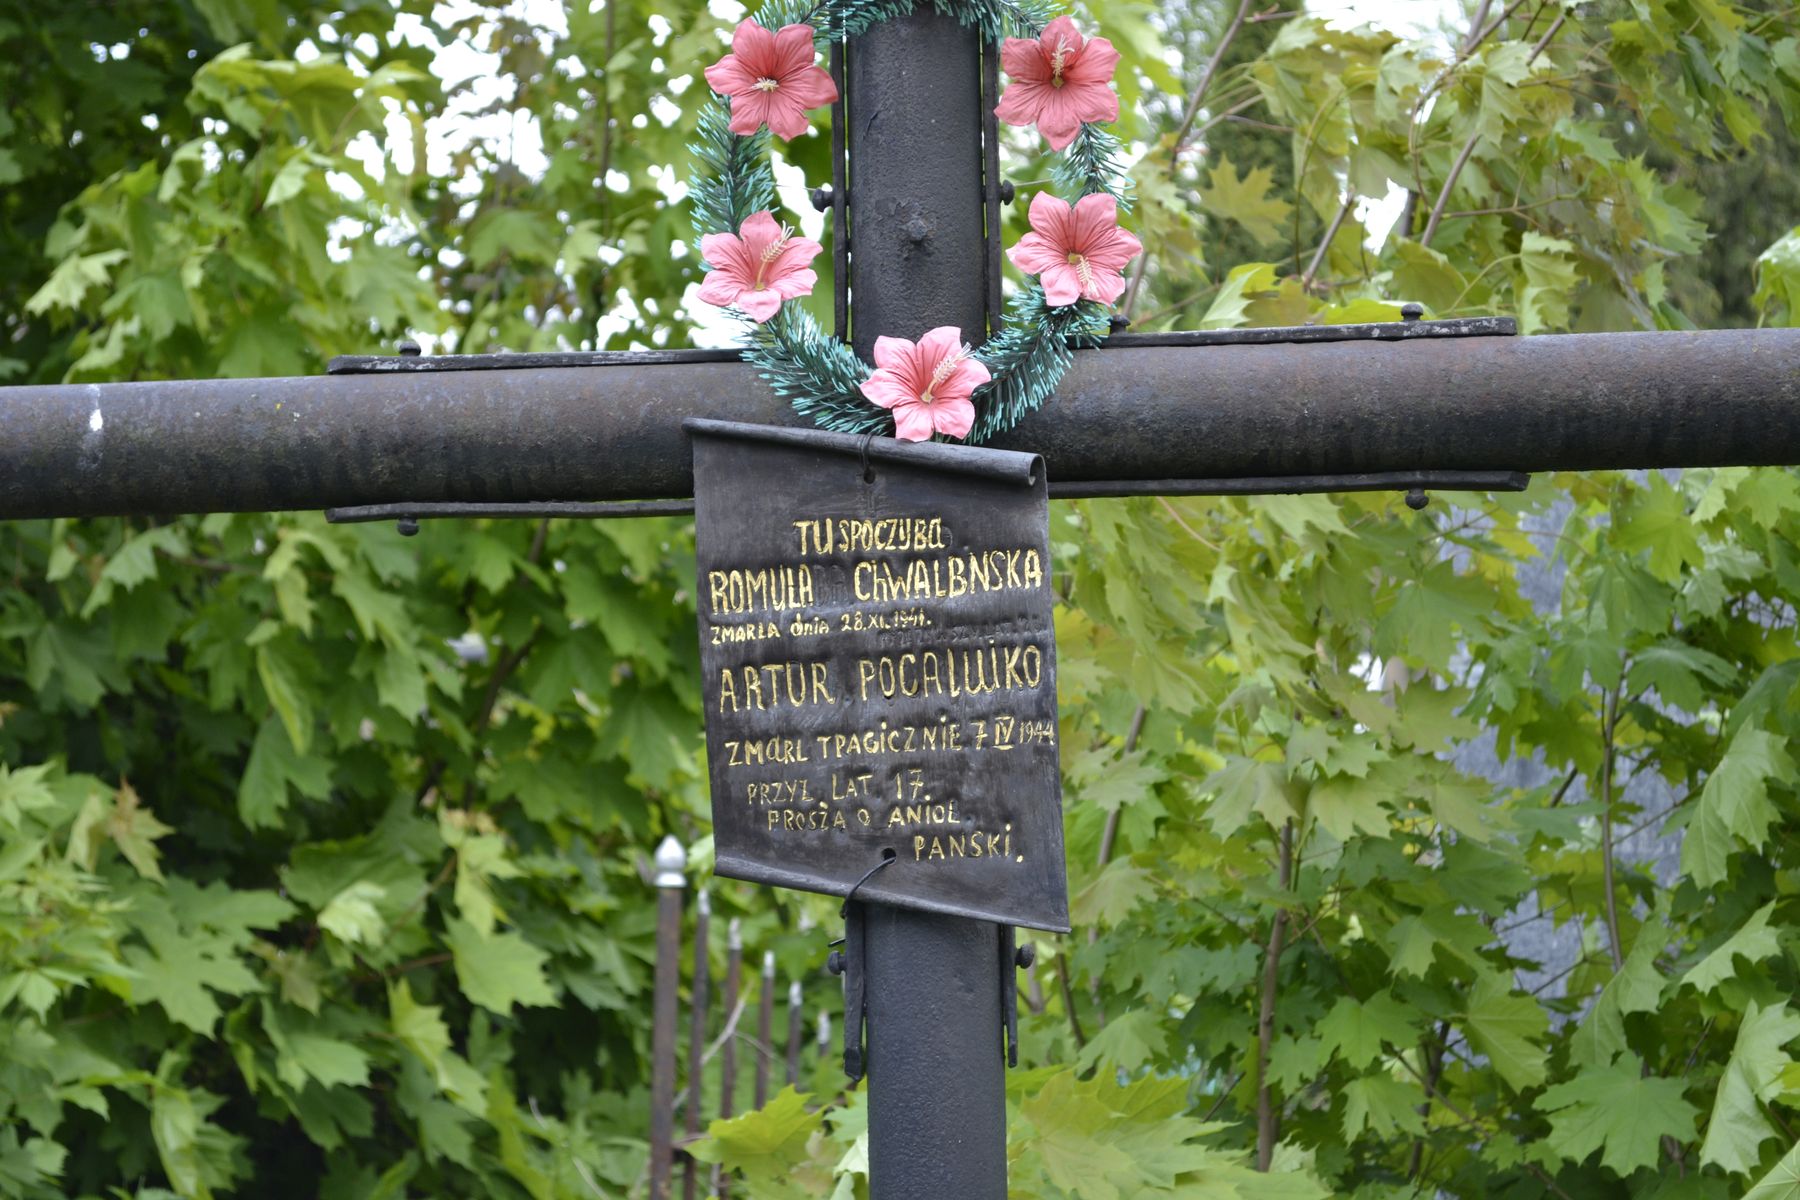 Inscription on the tombstone of Romula Chwalbnskaya and Artur Pocaluko, Ternopil cemetery, as of 2016